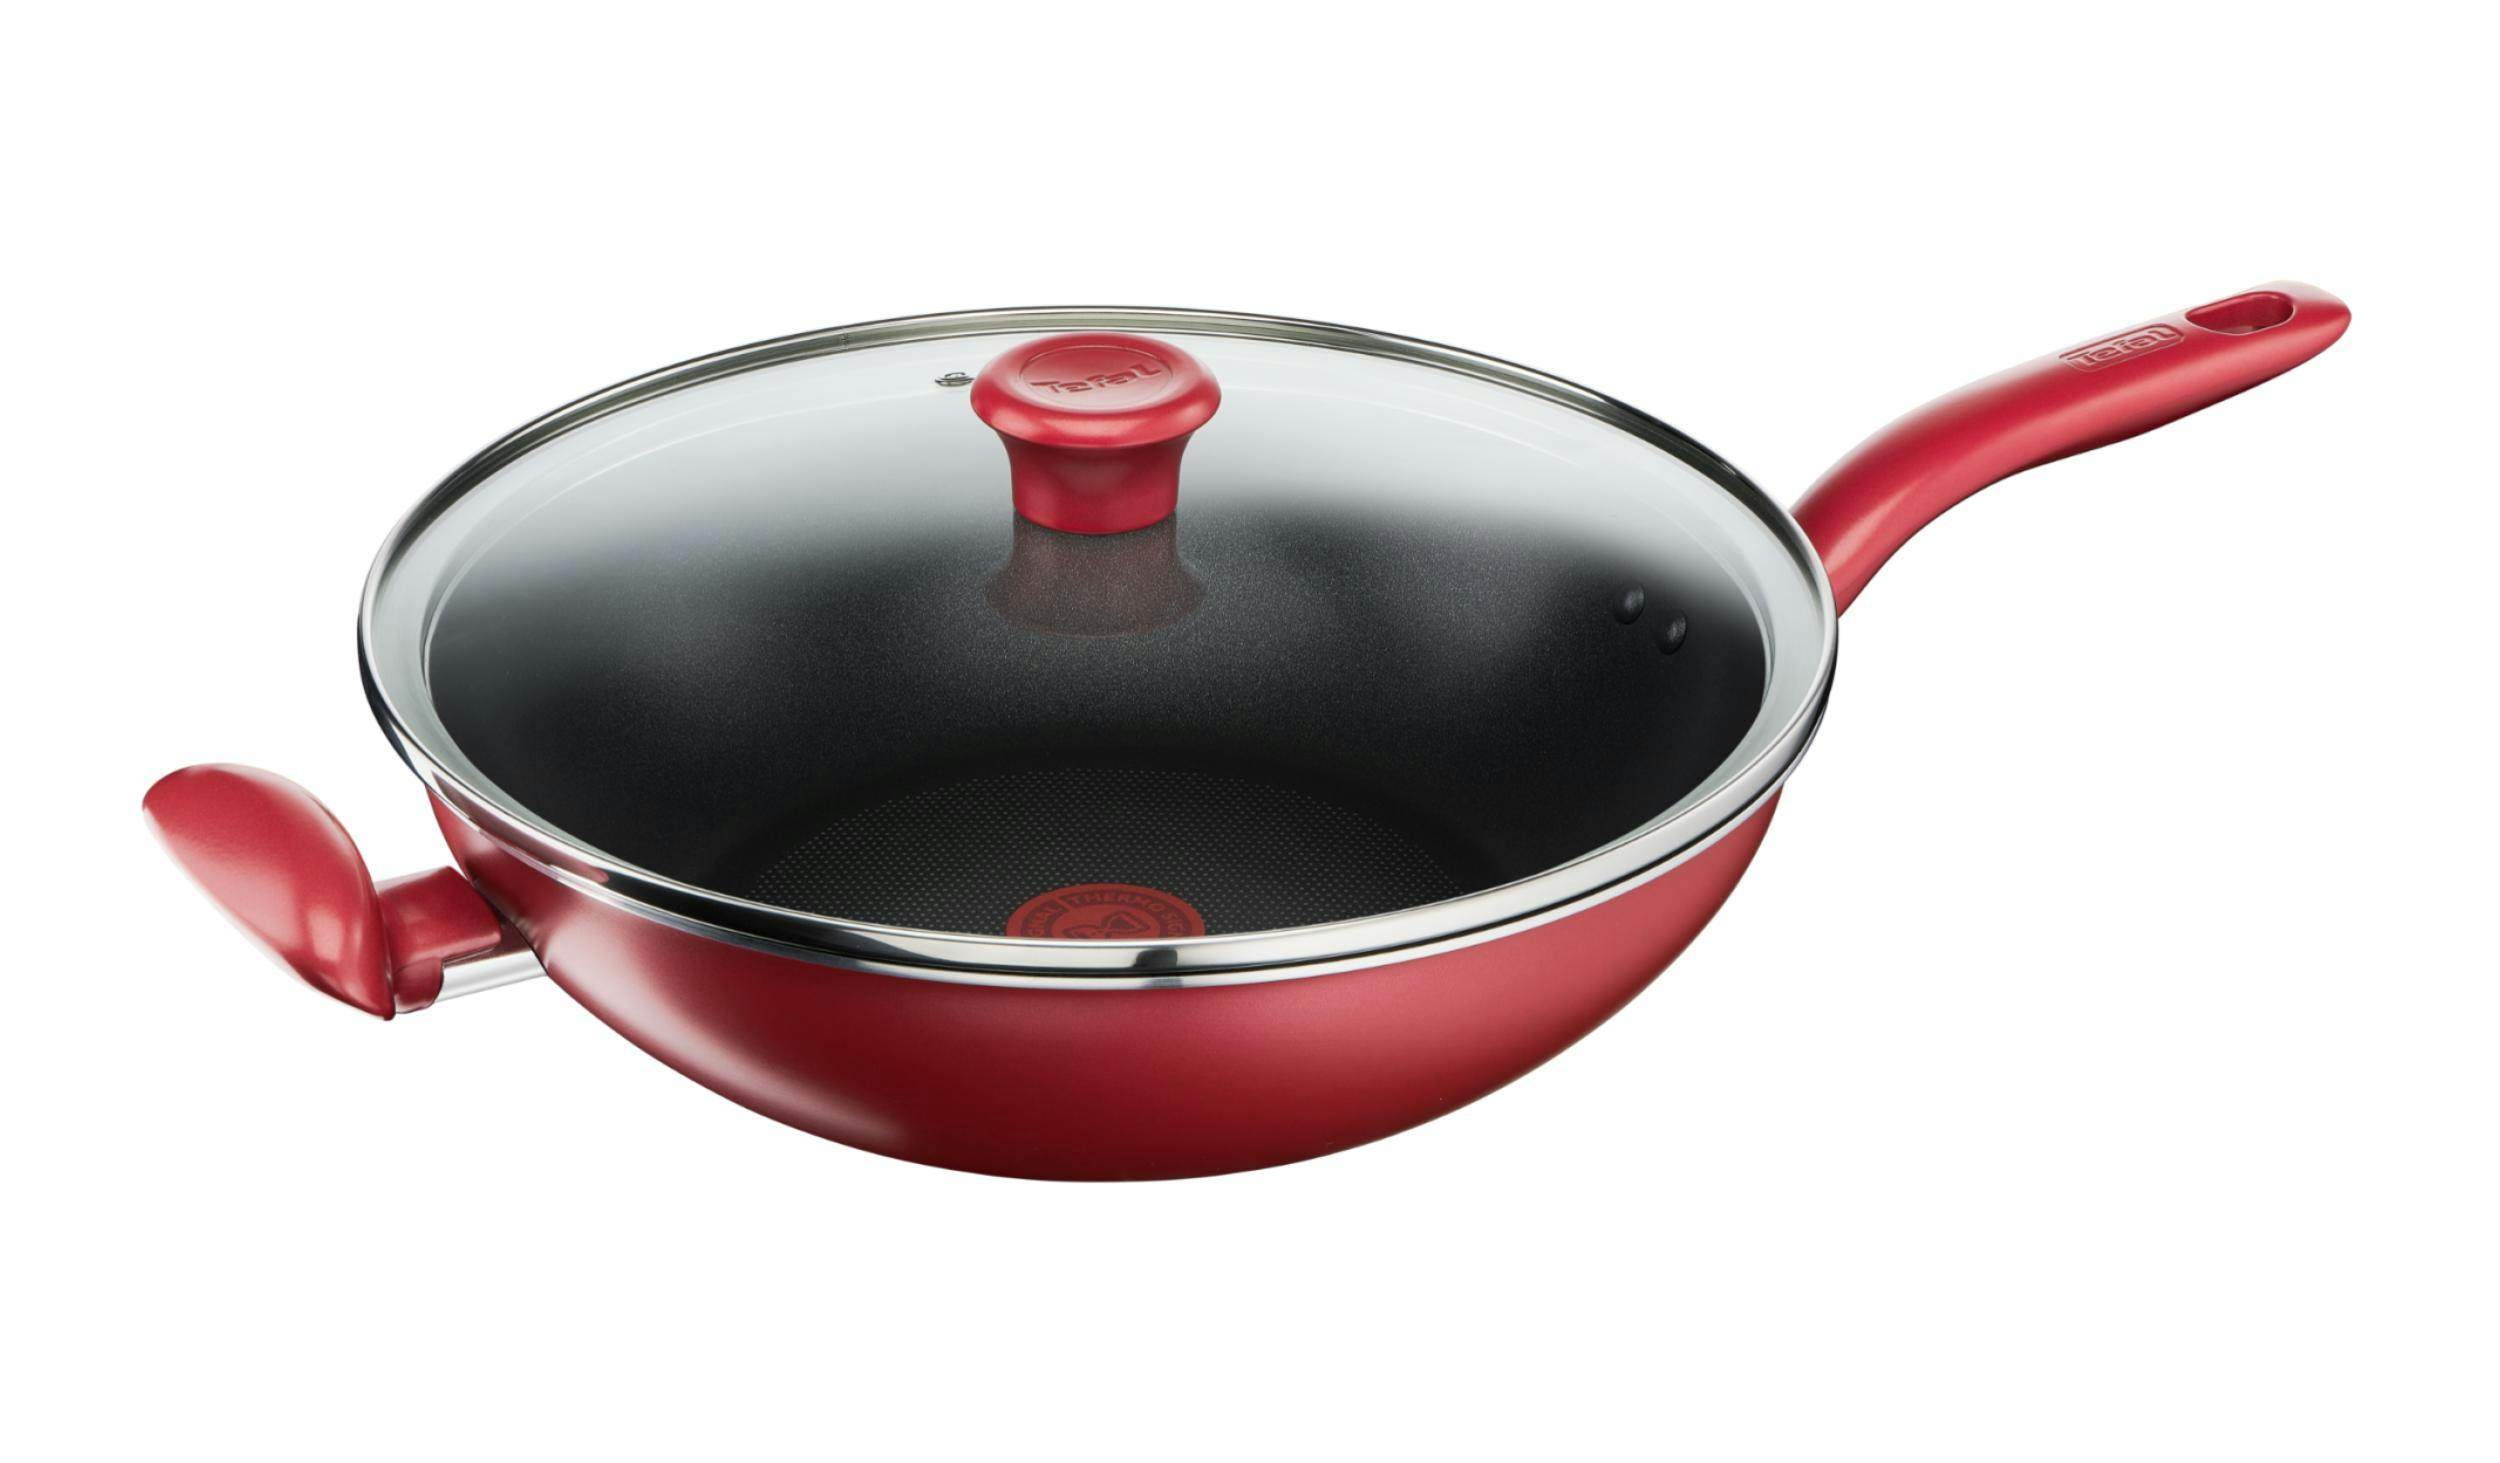 https://hnsgsfp.imgix.net/9/images/detailed/95/tefal-so-chef-wokpan-with-lid-32cm-g1359895.jpg?fit=fill&bg=0FFF&w=2500&h=1463&auto=format,compress